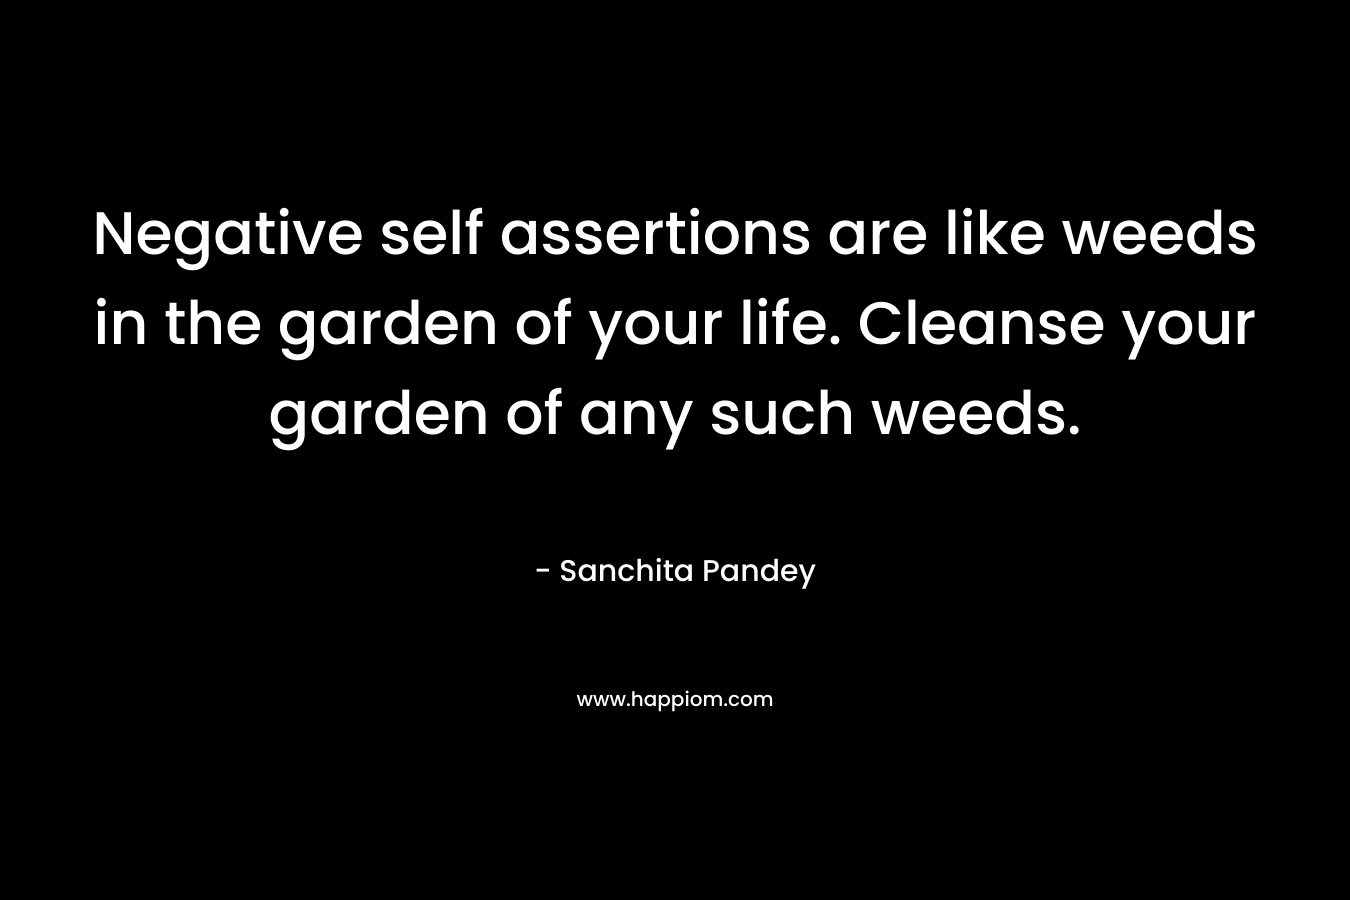 Negative self assertions are like weeds in the garden of your life. Cleanse your garden of any such weeds. – Sanchita Pandey